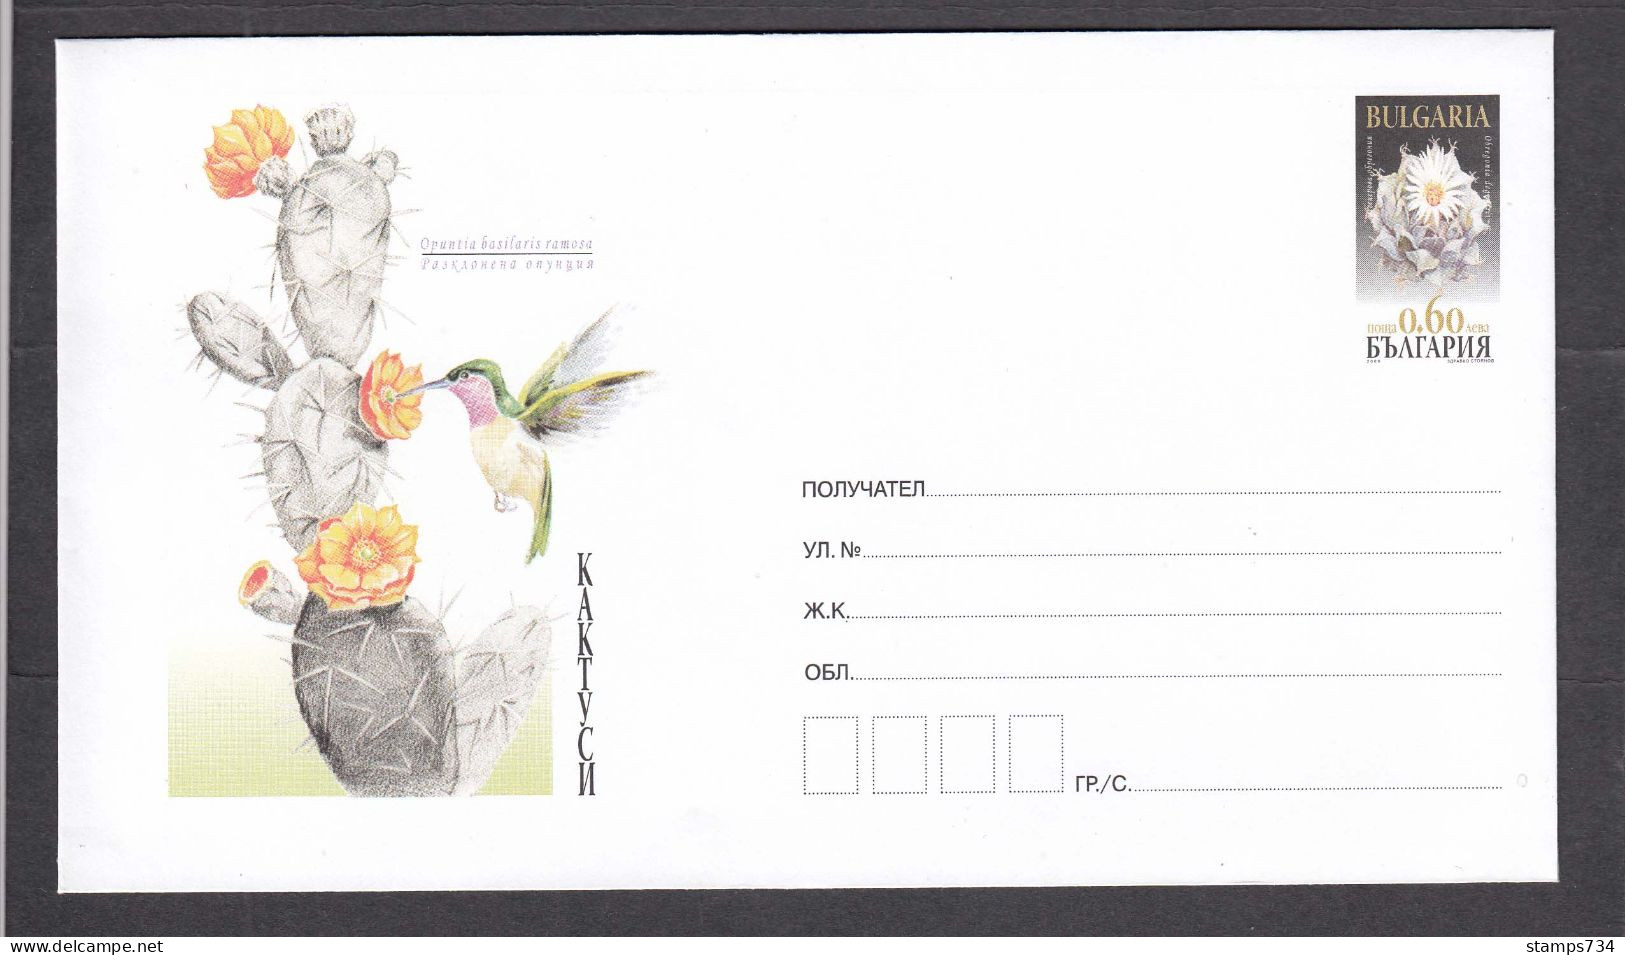 PS 1399/2009 - Mint, Cactusses, Post. Stationery - Bulgaria - Cactus